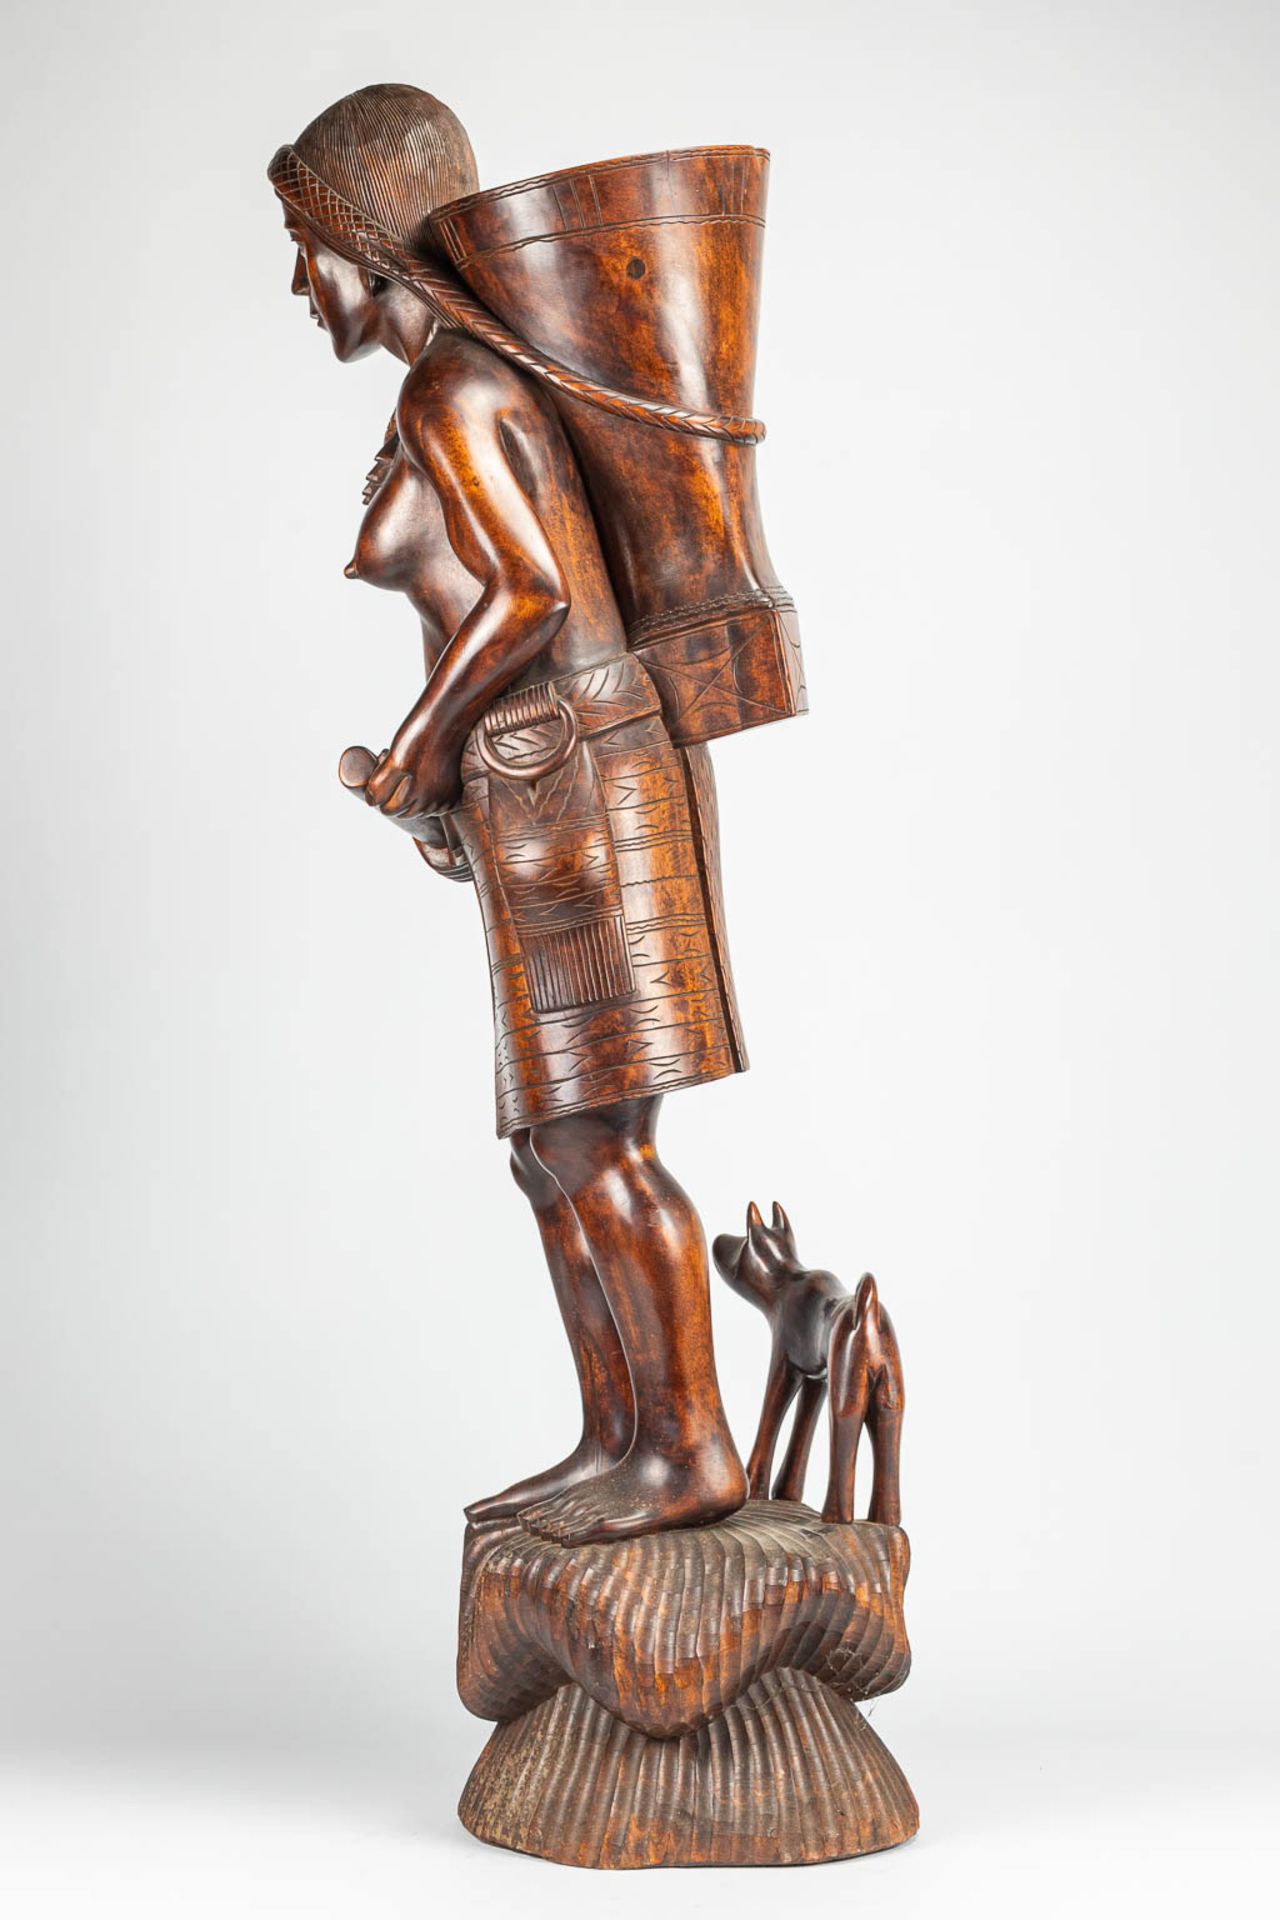 A large statue of an African woman, made of sculptured wood. - Image 5 of 8